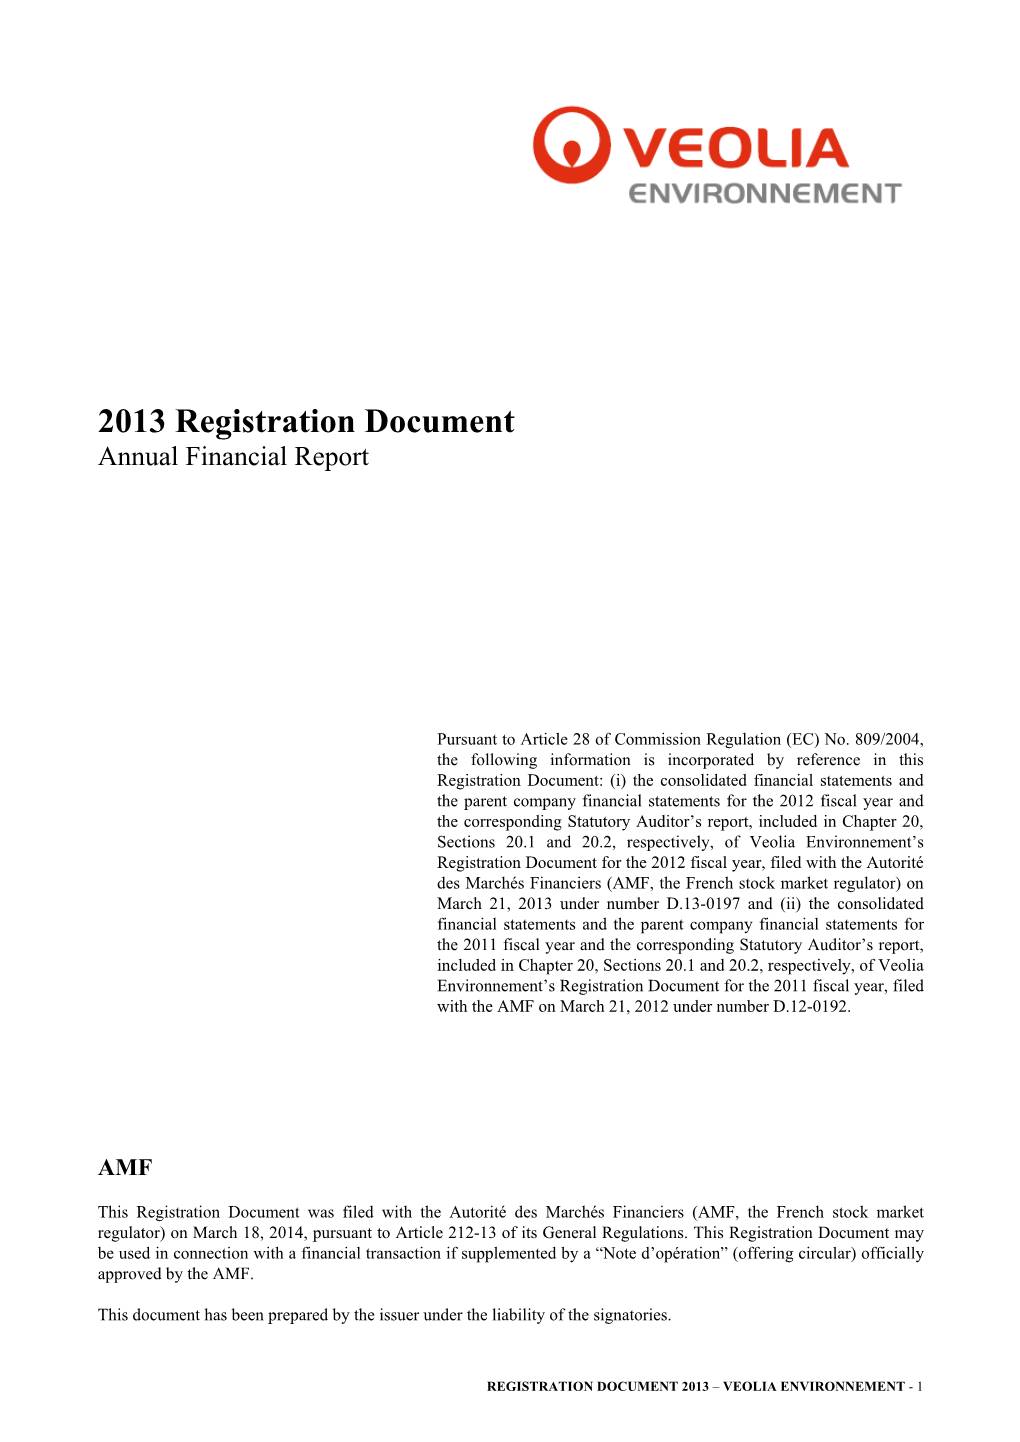 2013 Registration Document Annual Financial Report